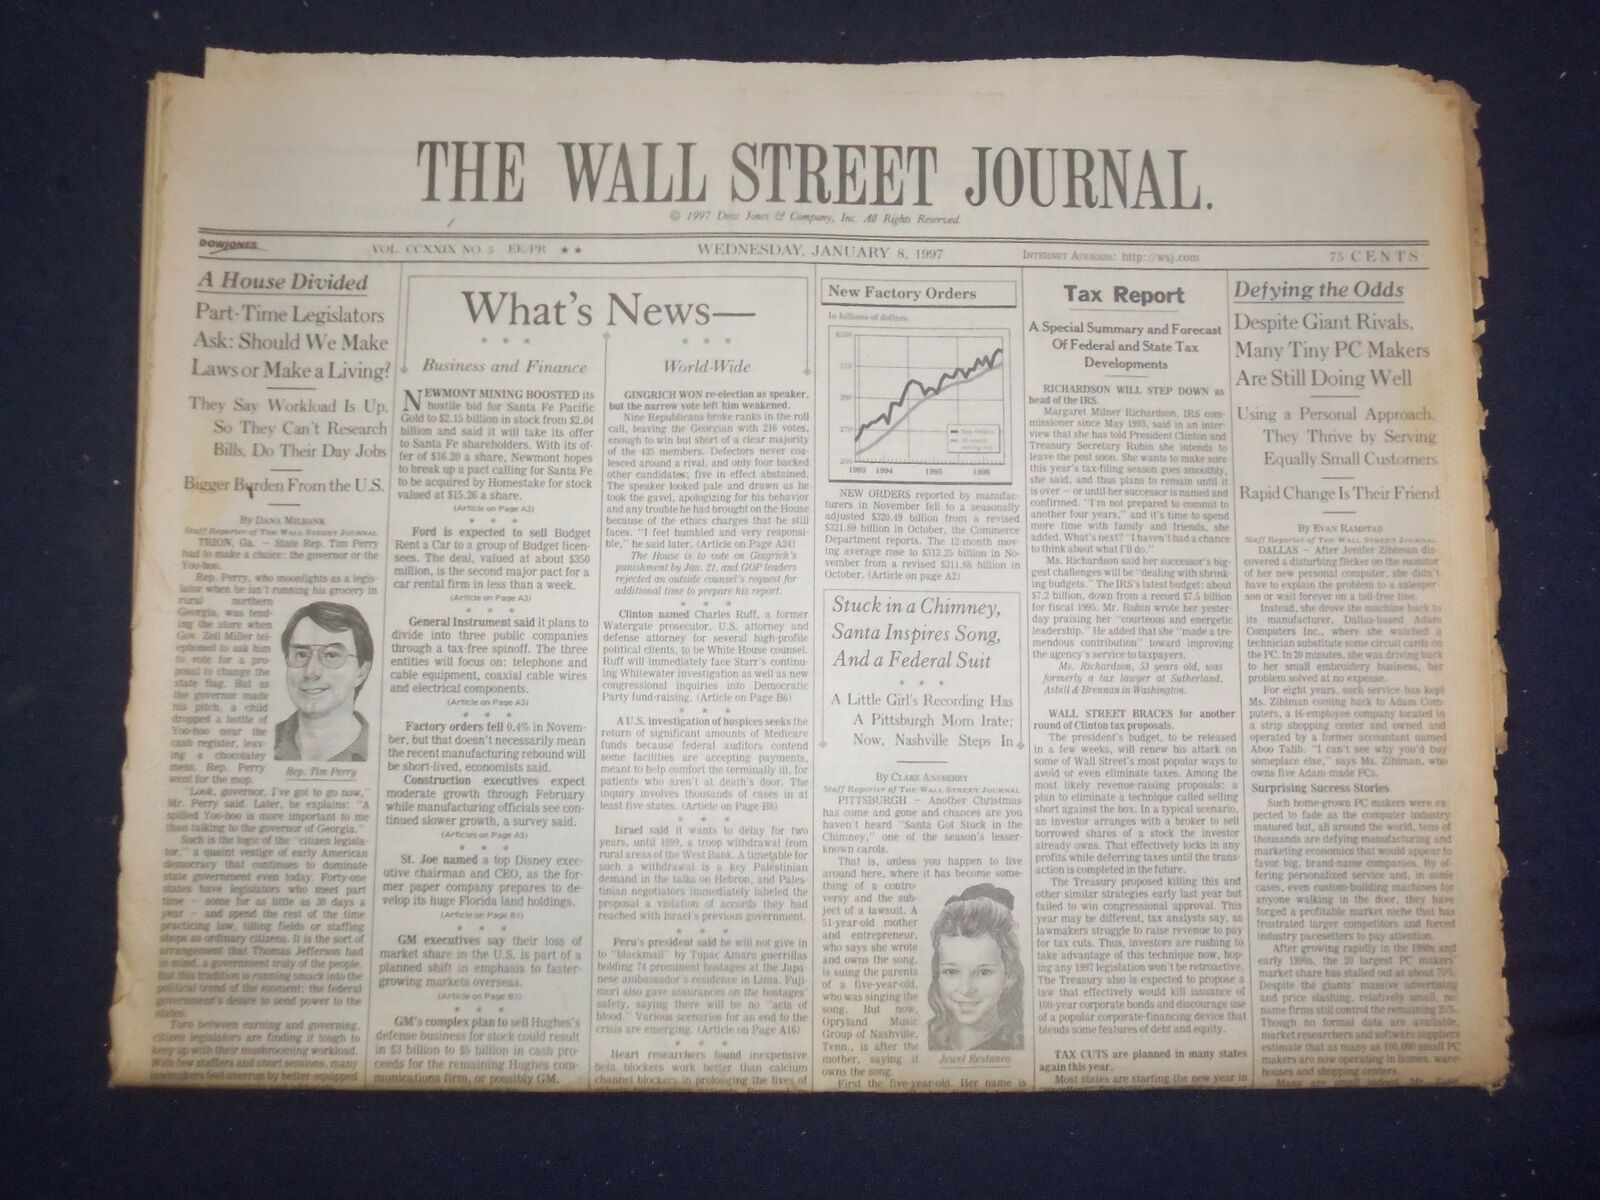 1997 JAN 8 THE WALL STREET JOURNAL -TINY PC MAKERS ARE STILL DOING WELL - WJ 368